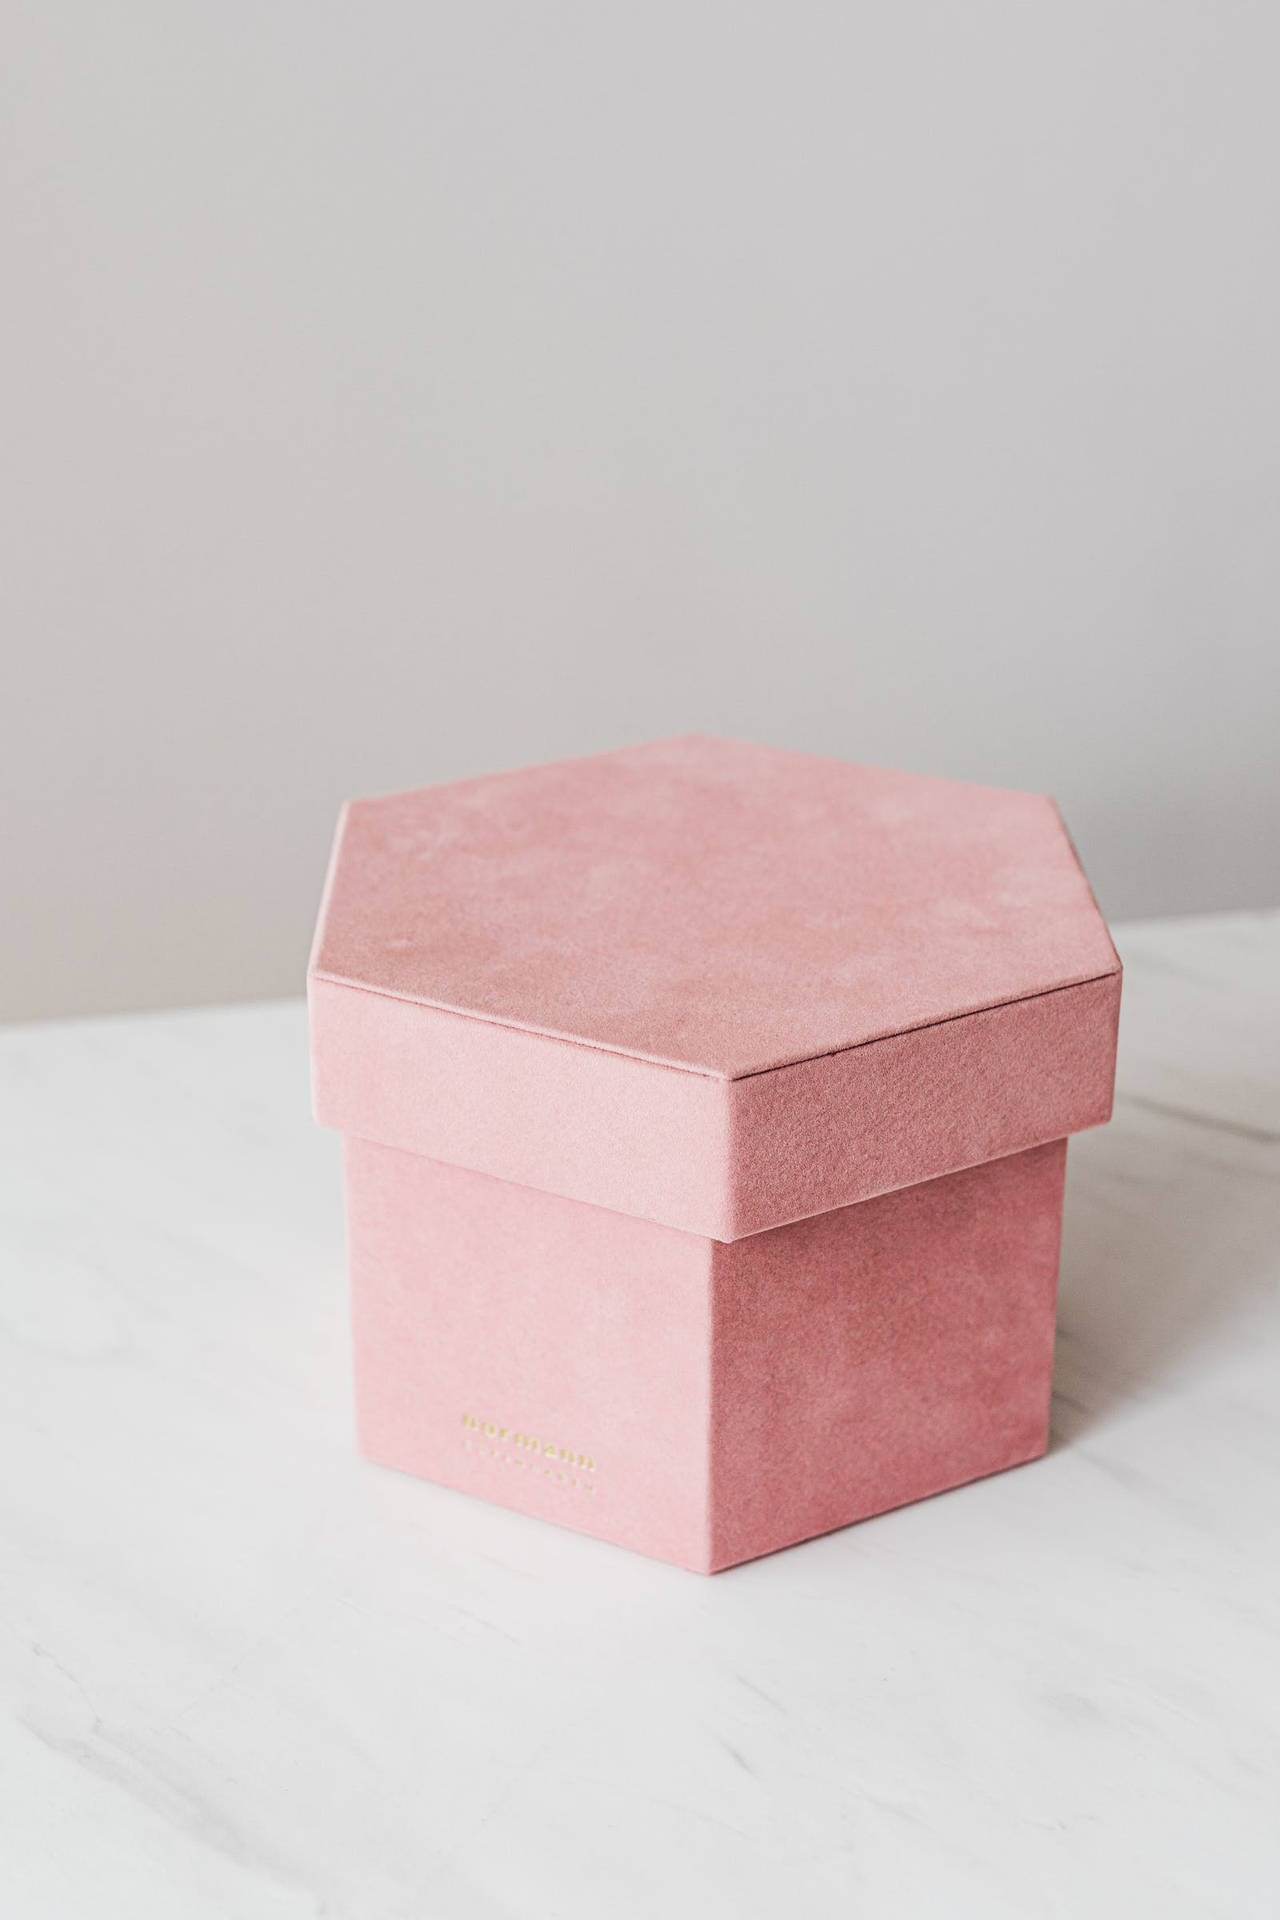 Pastel Pink Color Hexagon Box Background